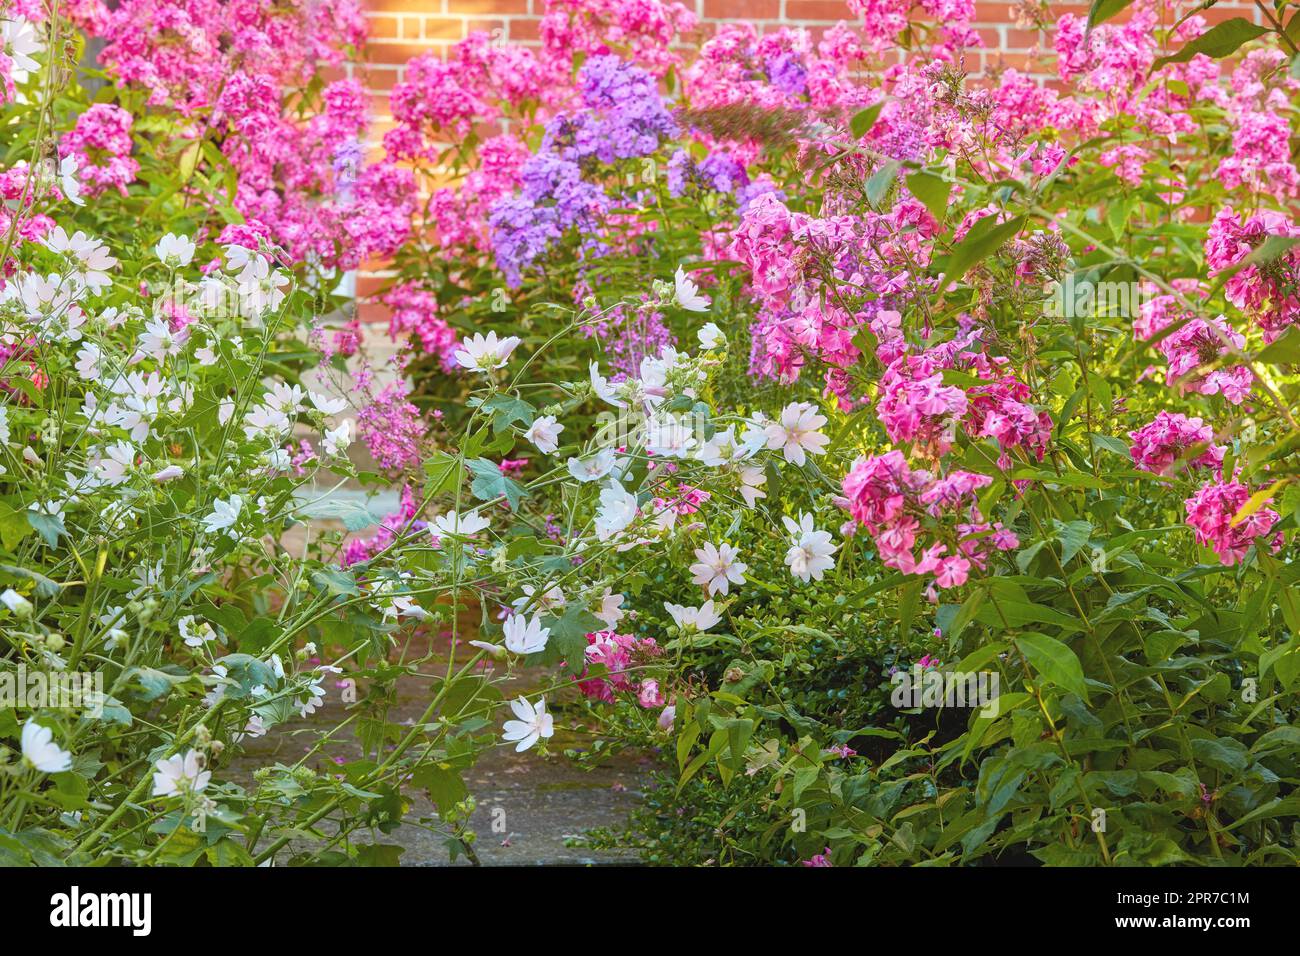 A garden with white cuckoo flowers and Phlox Paniculata Pink Flame flowers. Bush of blooming flowers in the garden on a sunny day. A meadow filled with colorful flowers with a wall in the background Stock Photo